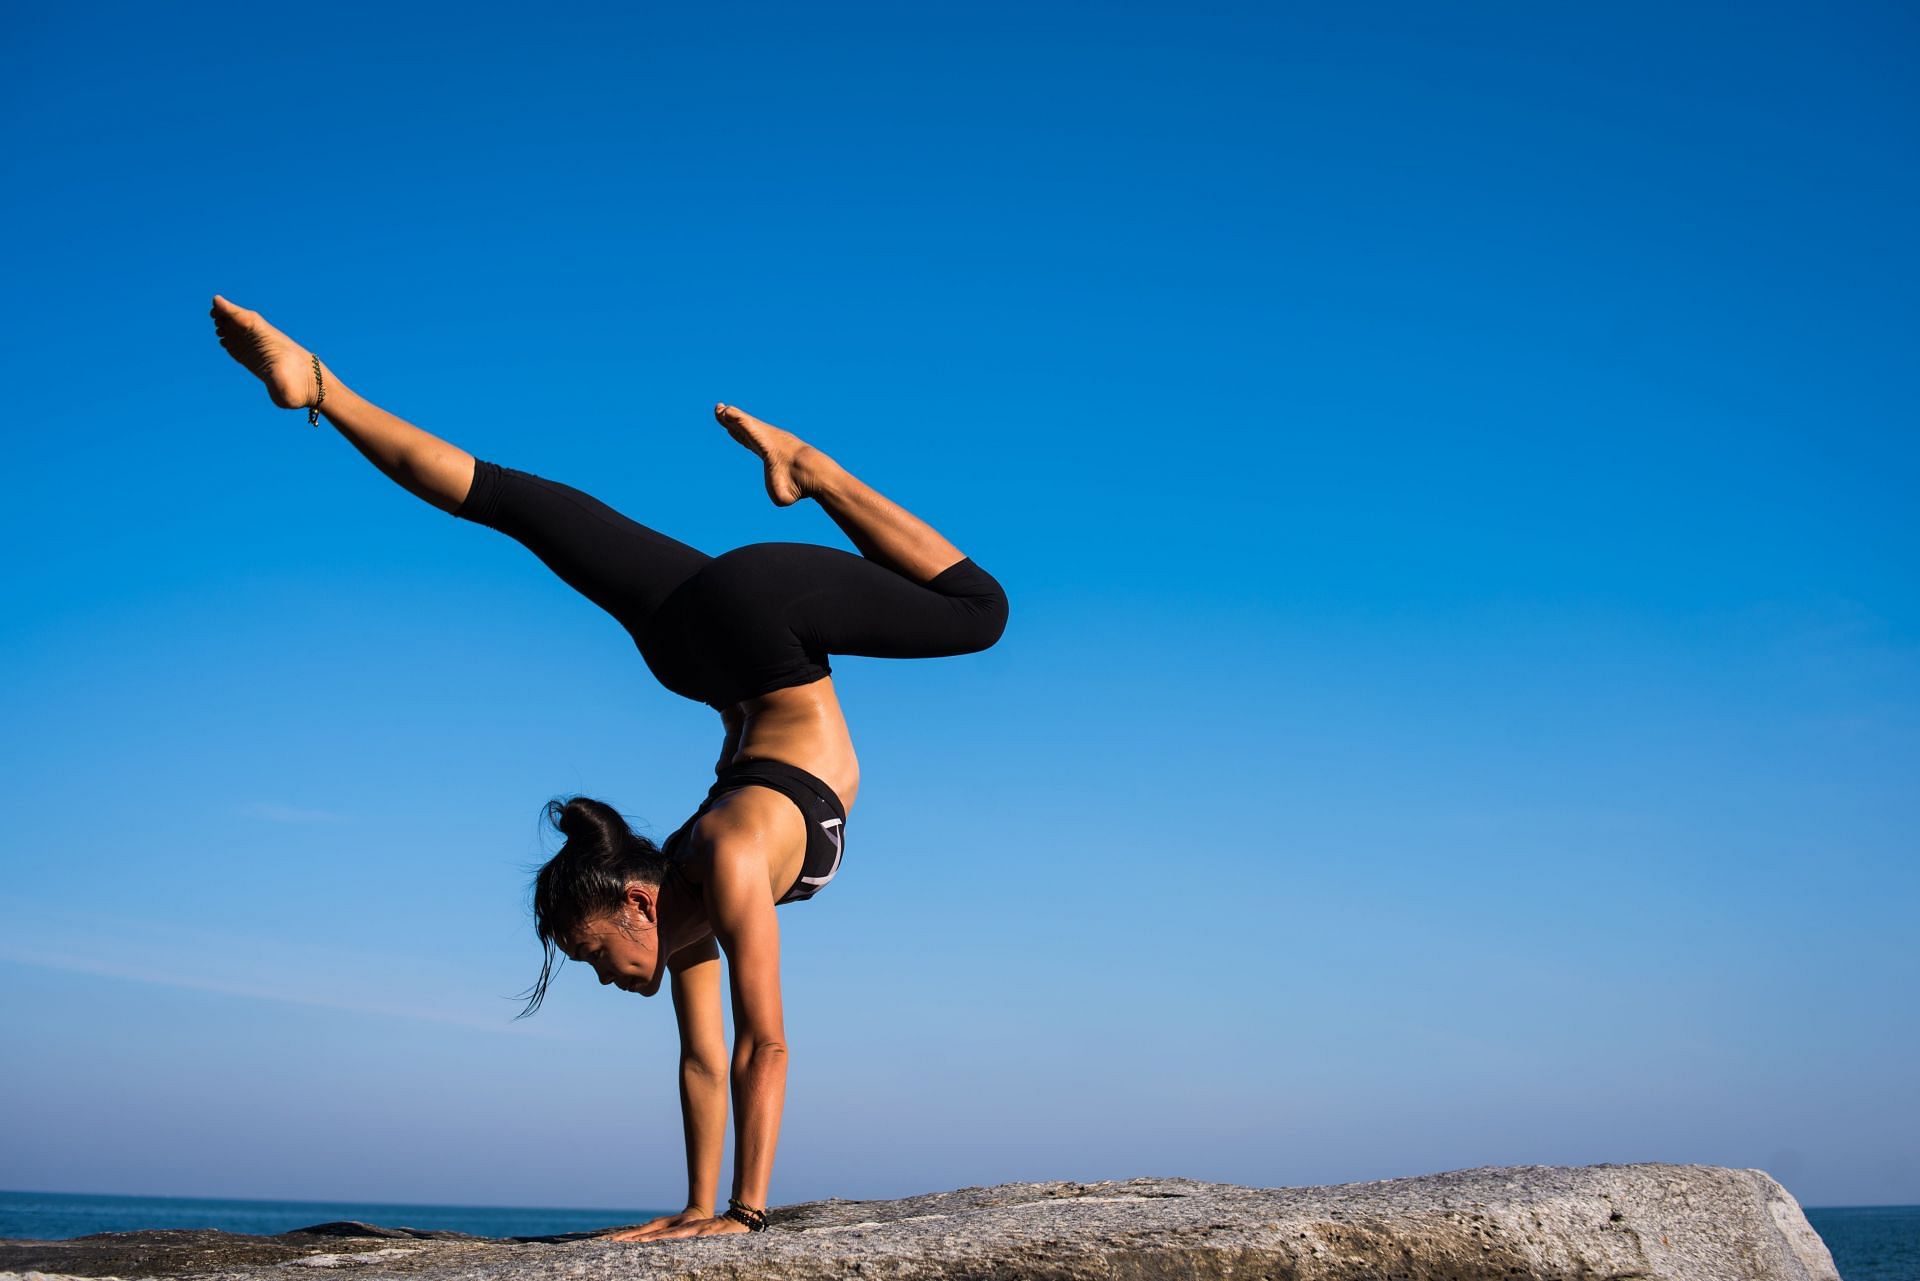 Benefits of body balance (image sourced via Pexels / Photo by Chevanon)